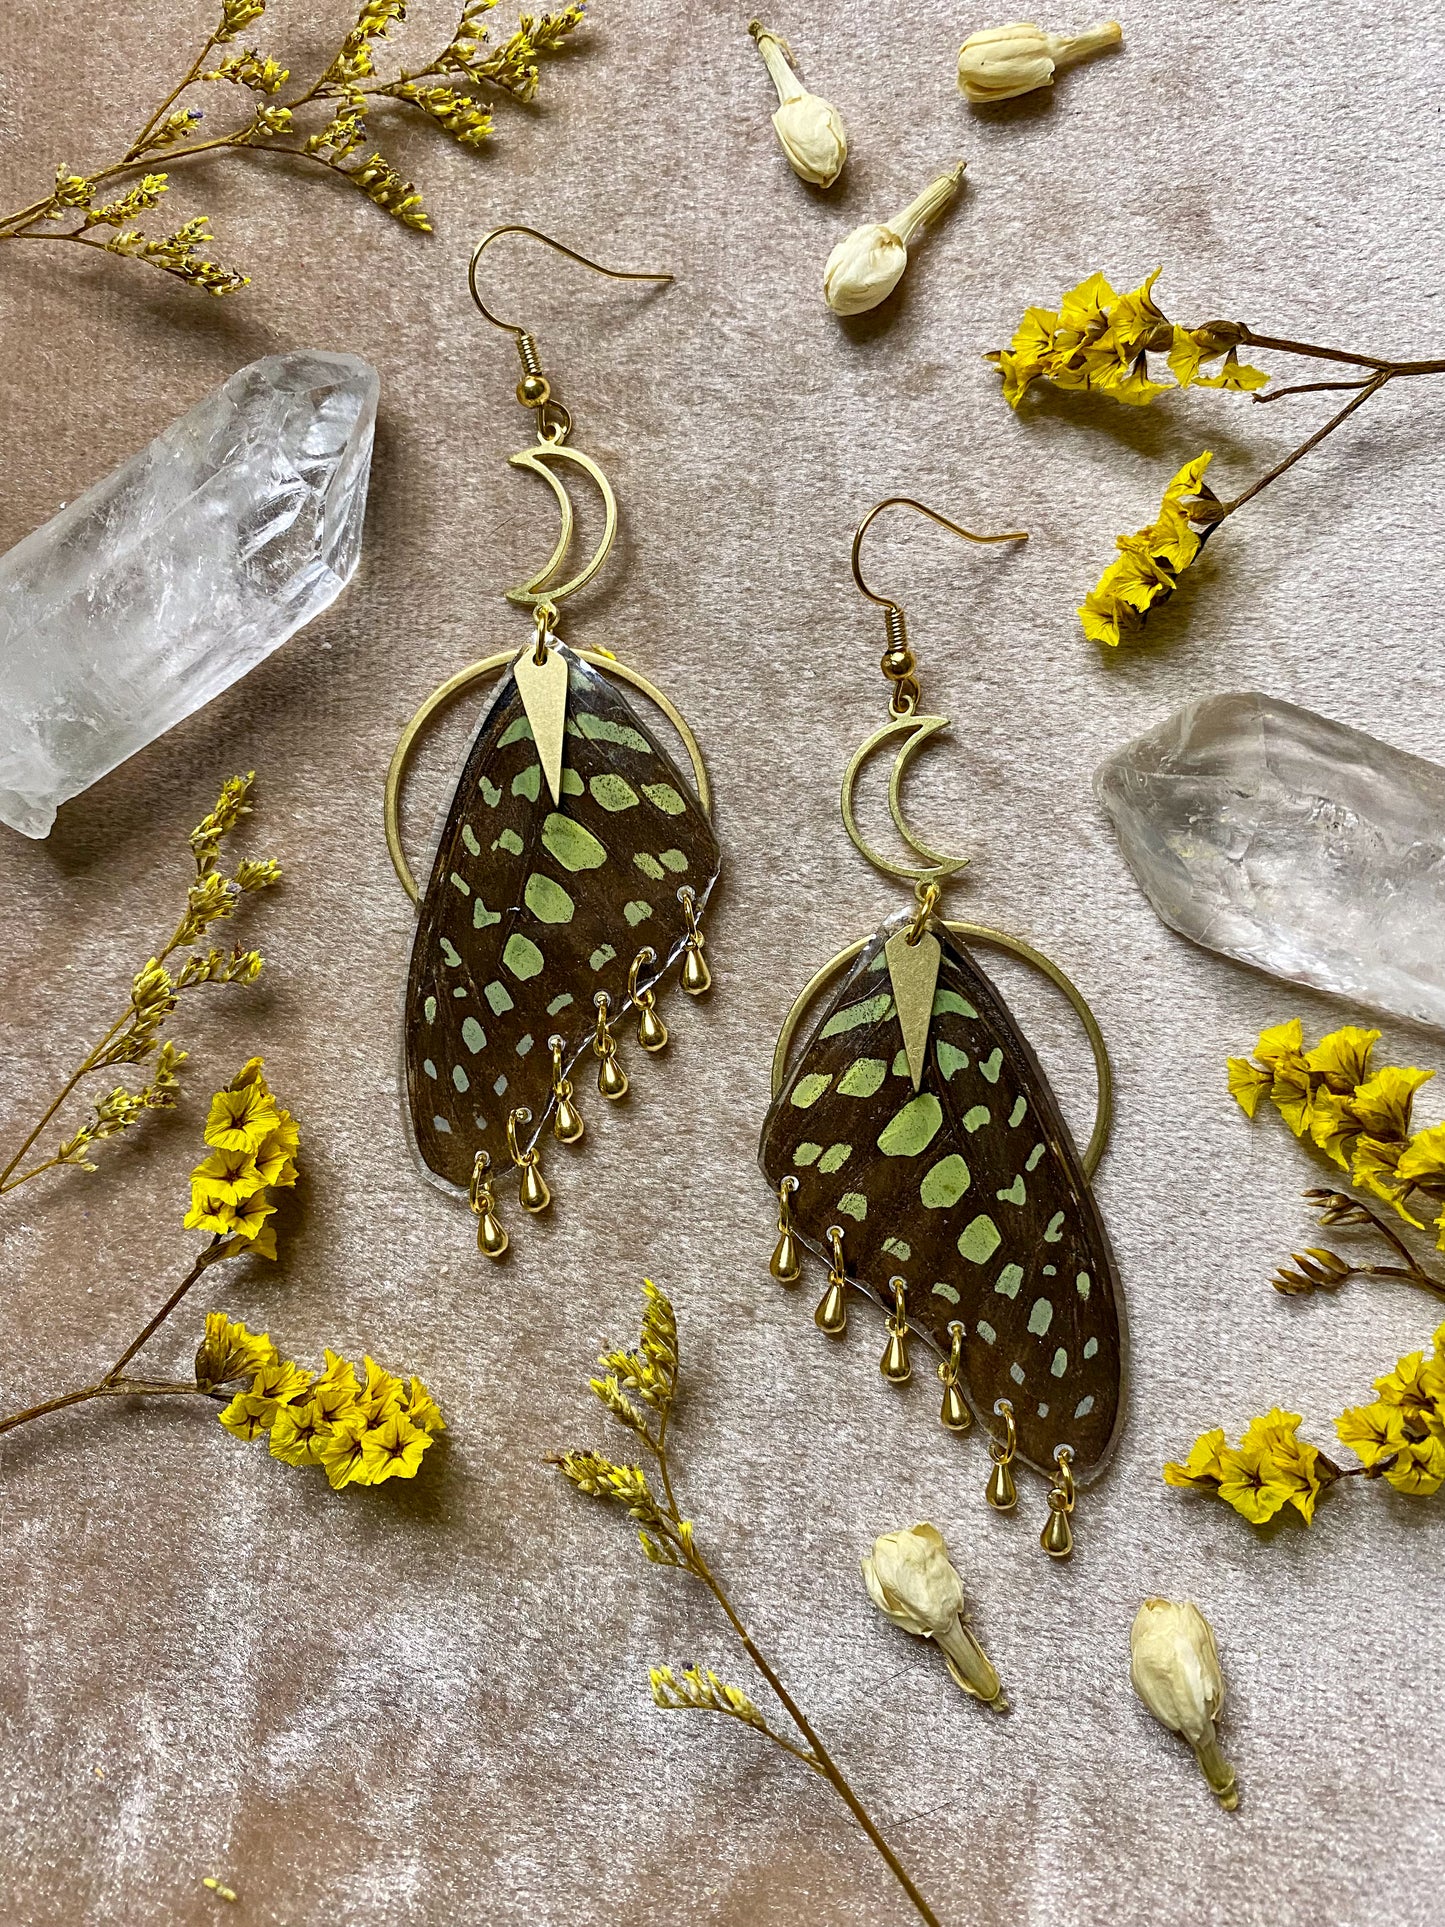 real green spotted triangle butterfly wings in resin earrings